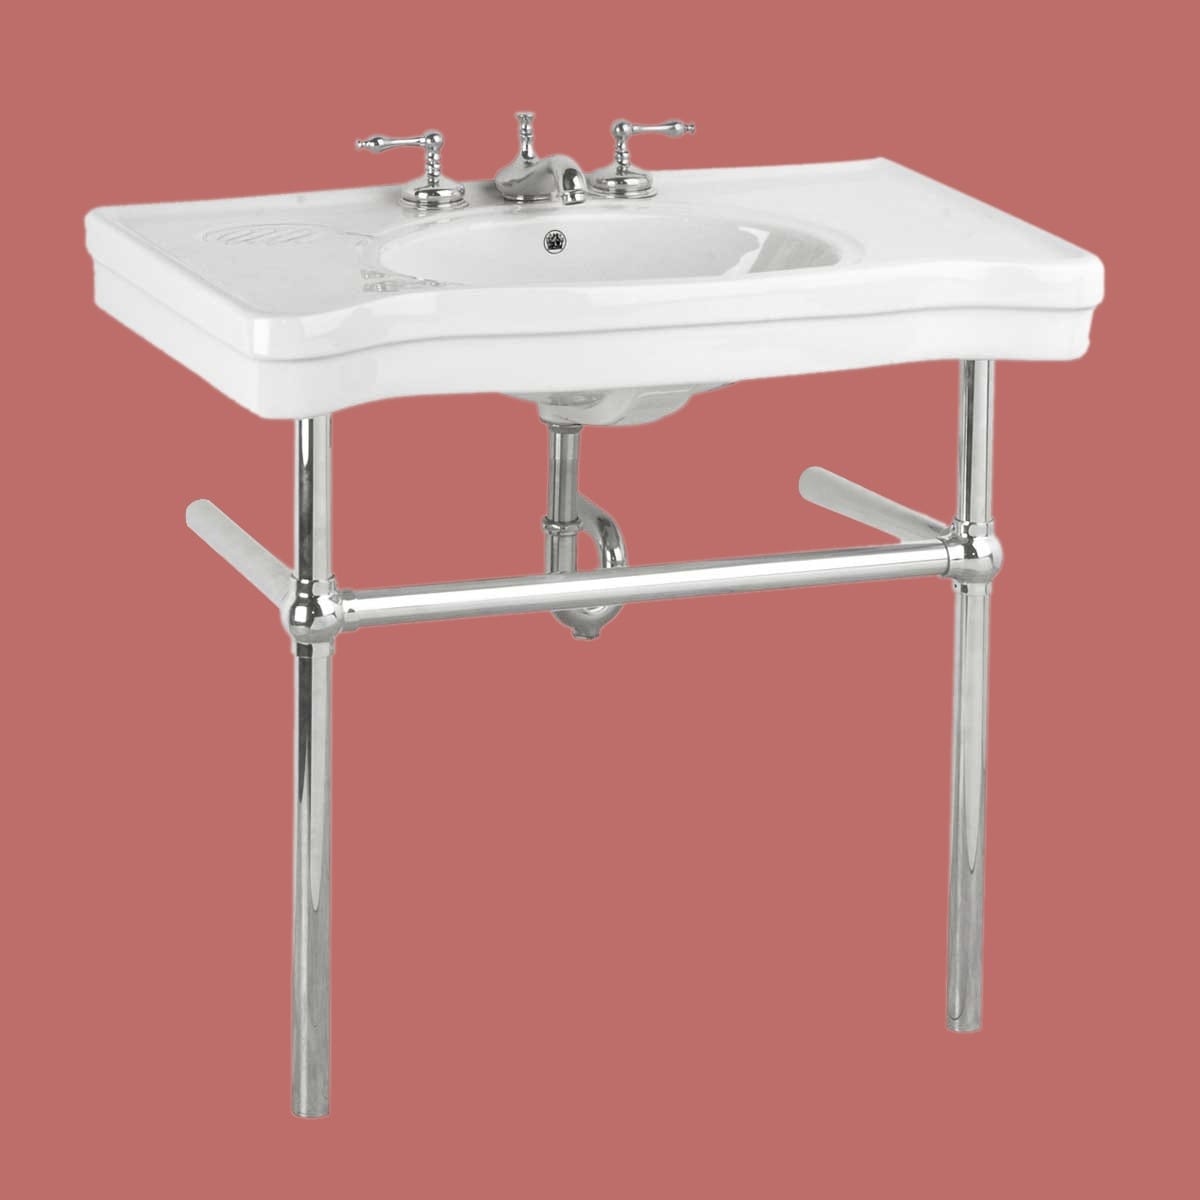 White China Console Sink Wall Mount Belle Epoque Chrome Bistro Legs Overstock 12636447